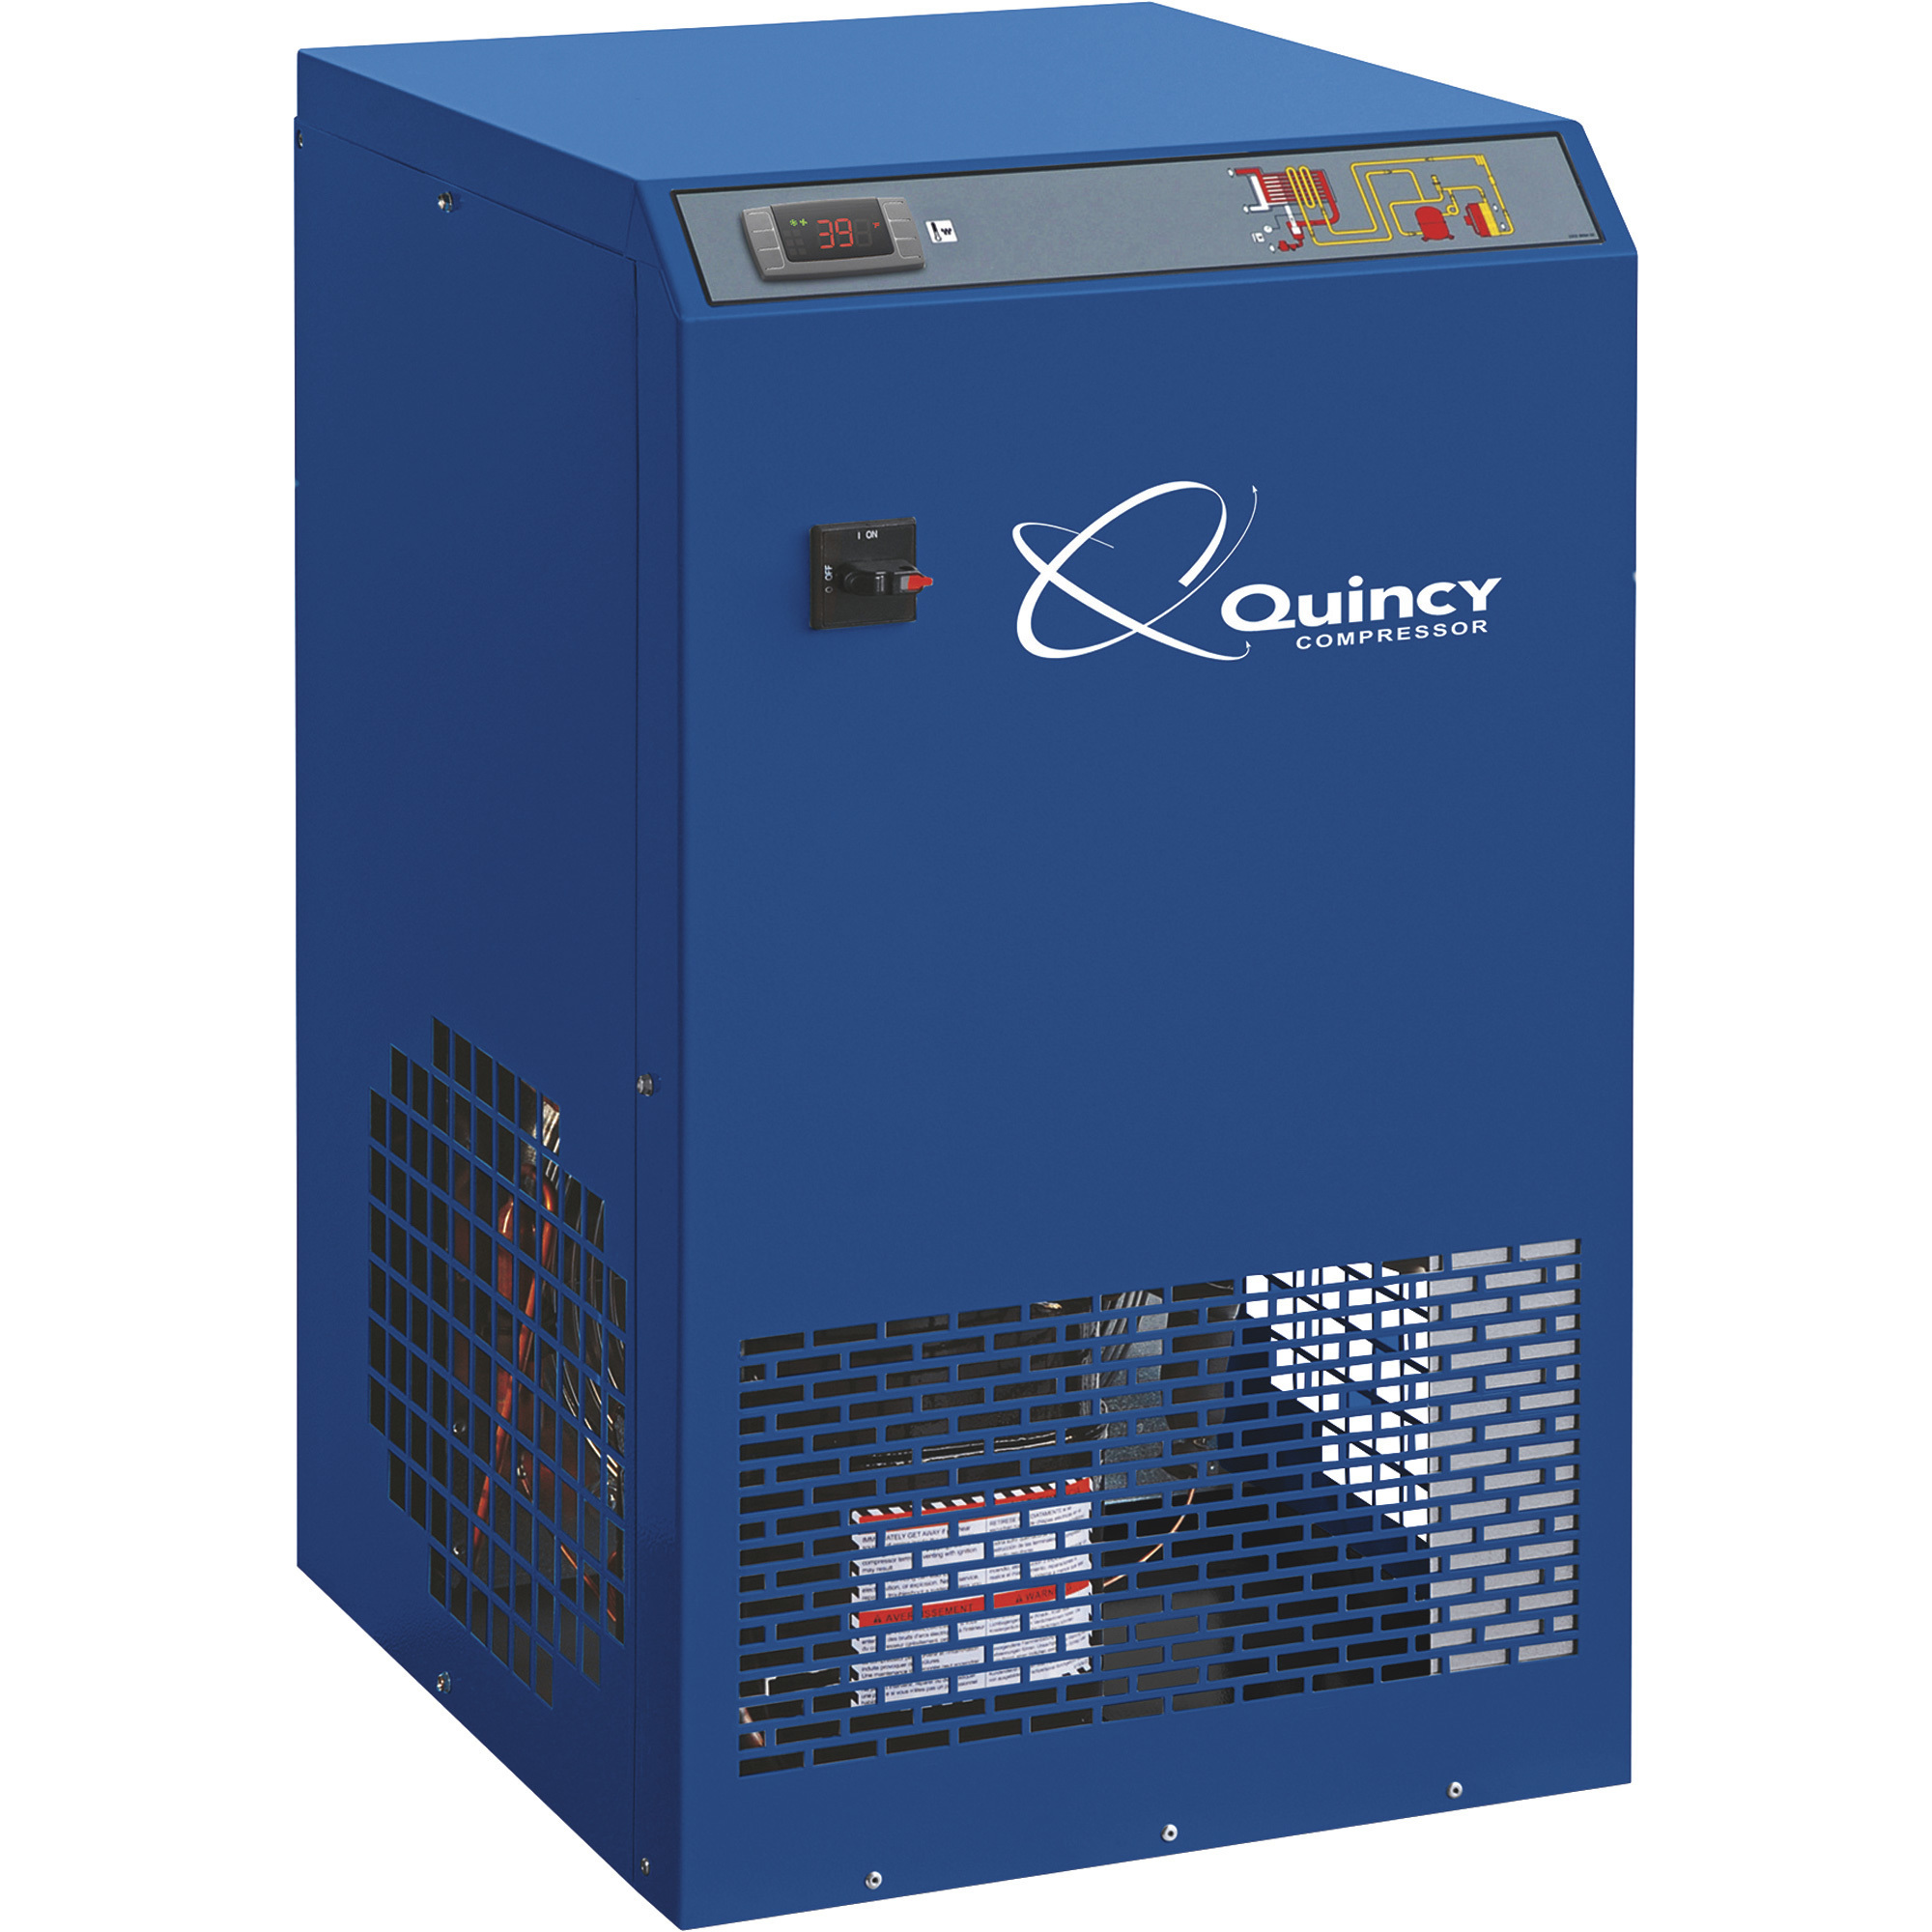 Quincy Non-Cycling Refrigerated Air Dryer, 83 CFM, 115 Volt, Single Phase, Model # QPNC-83